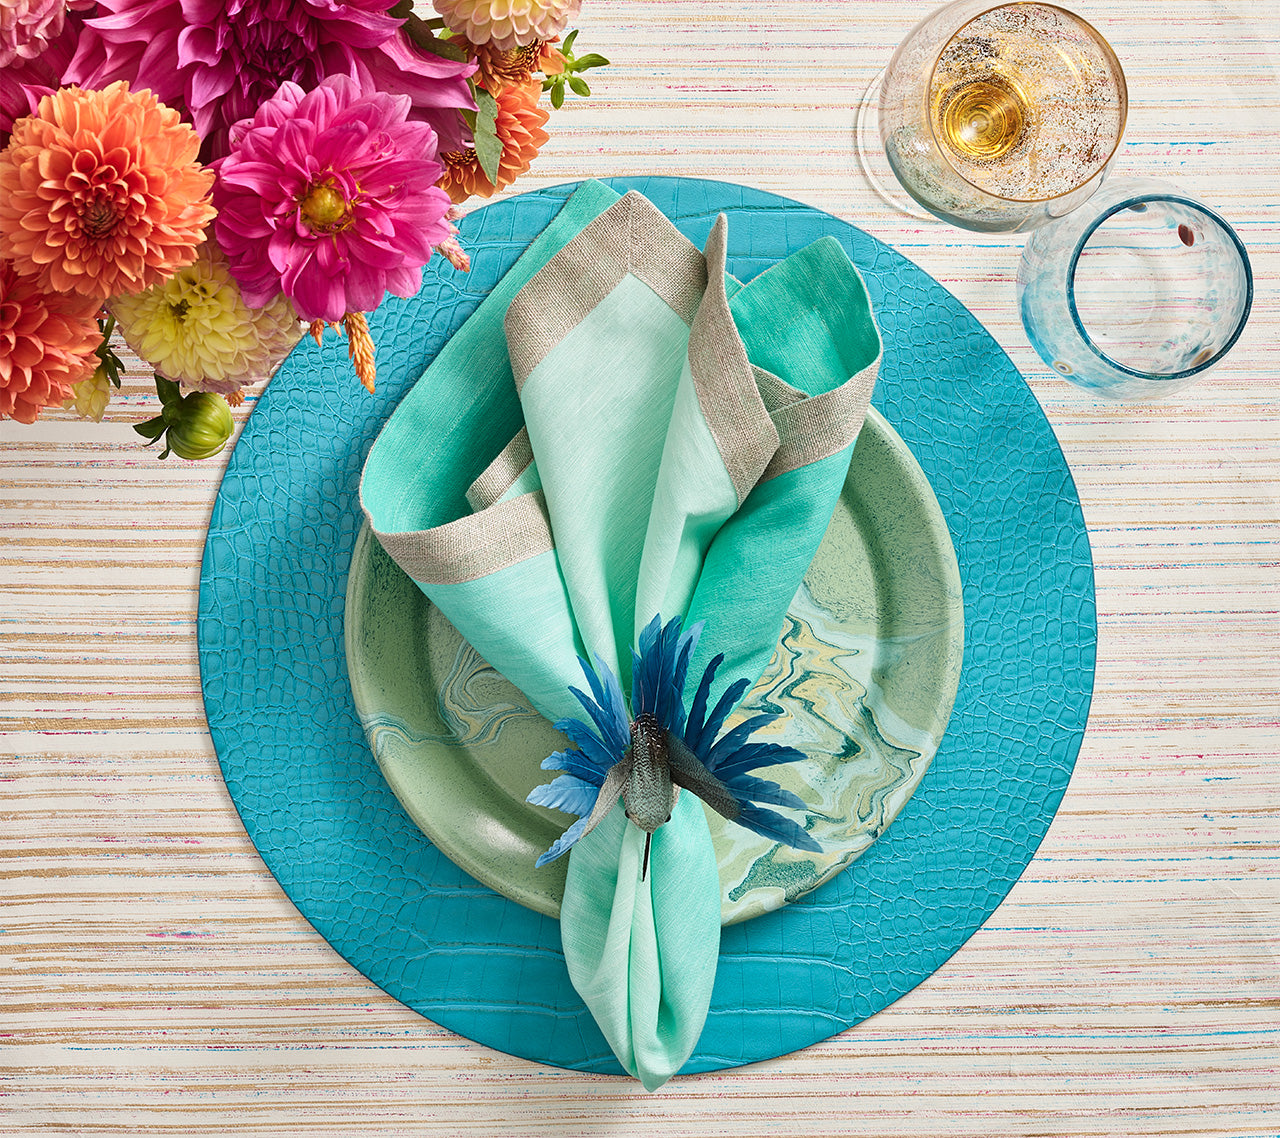 Round Croco Placemat with an embossed faux crocodile pattern in turquoise